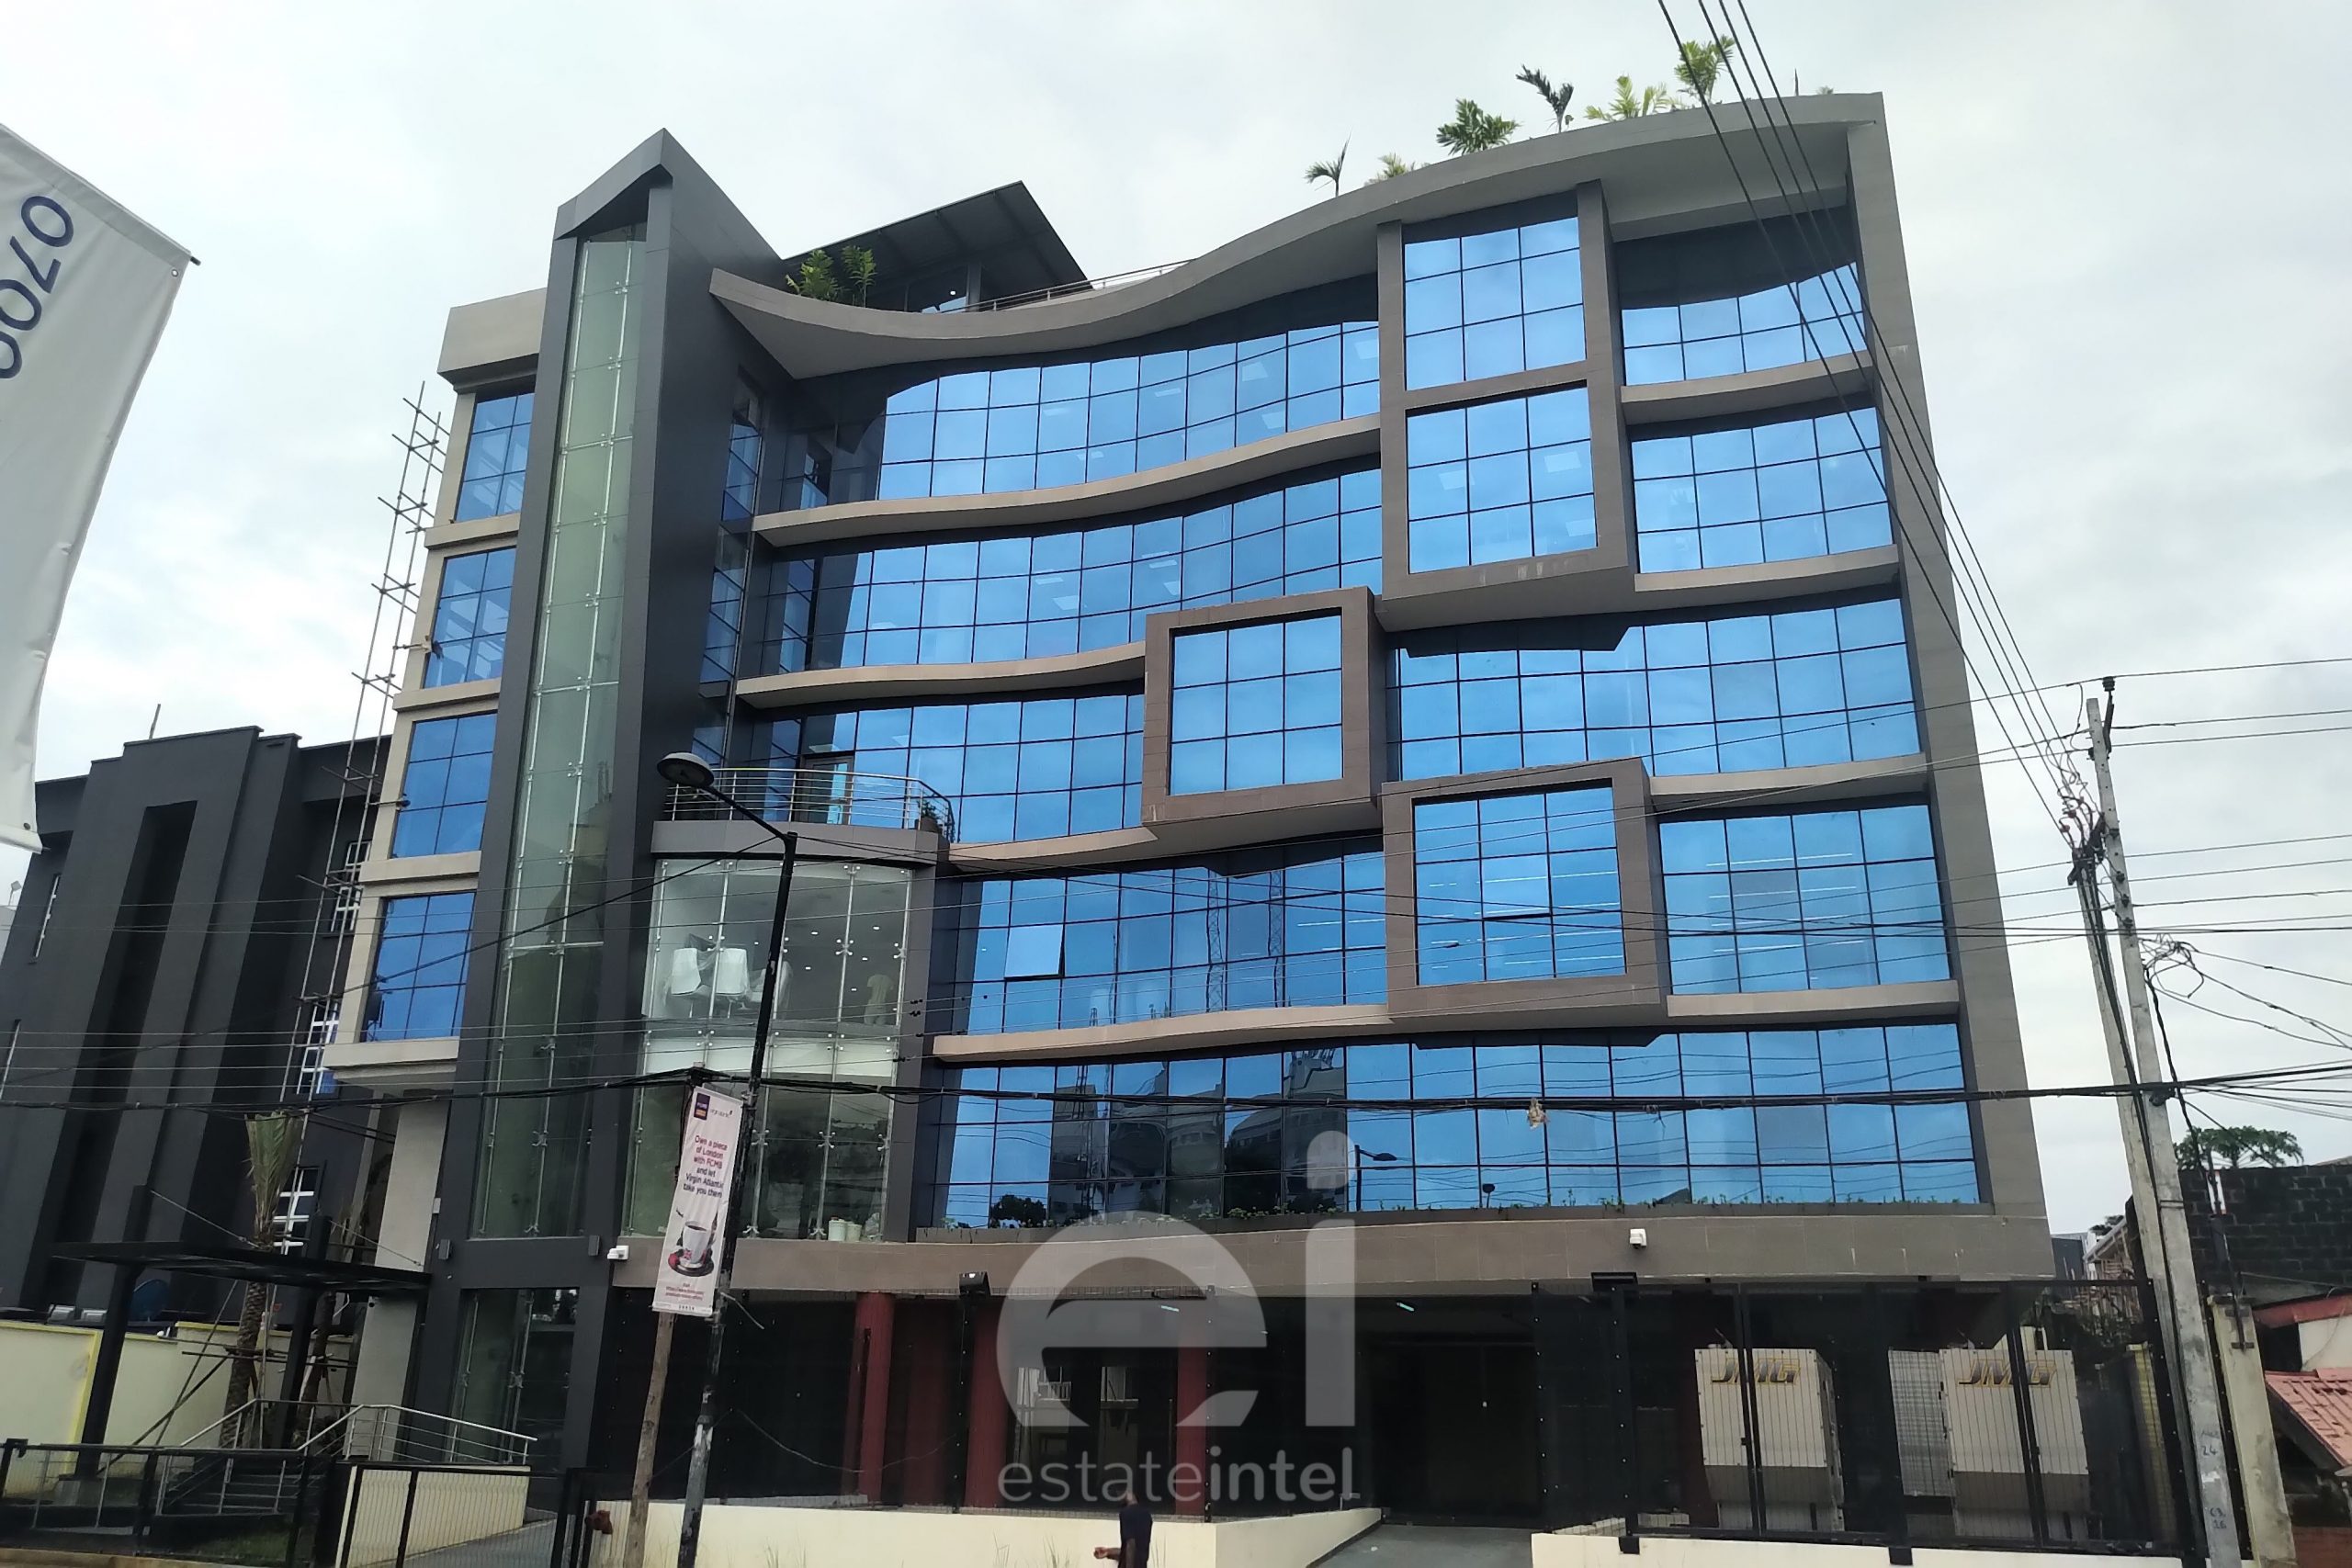 Lagos&#8217; biggest Lawyers are becoming your landlords